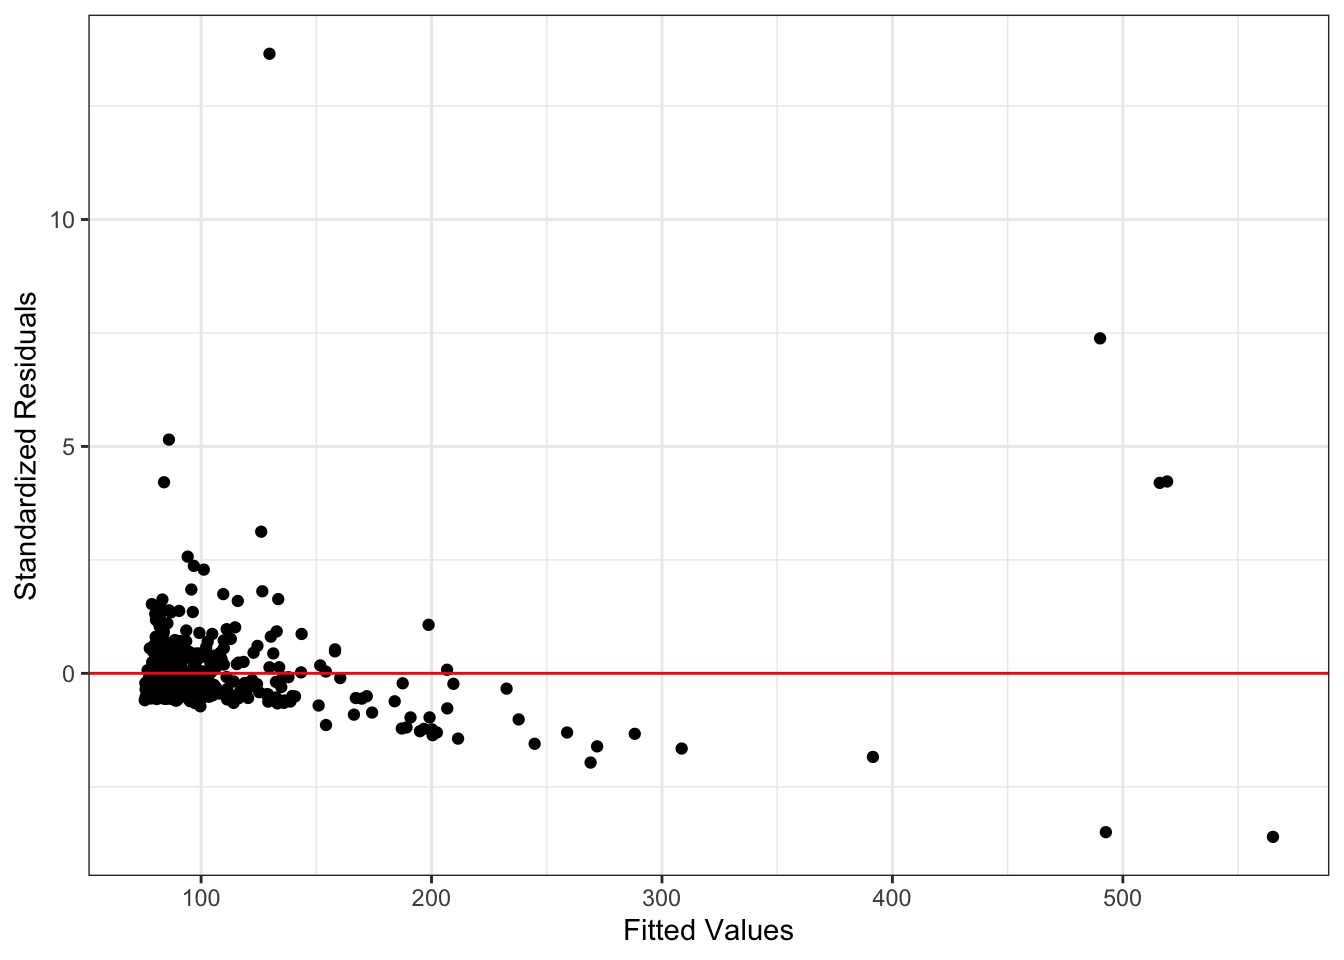 Residuals versus fitted values in regression model for stock price data.